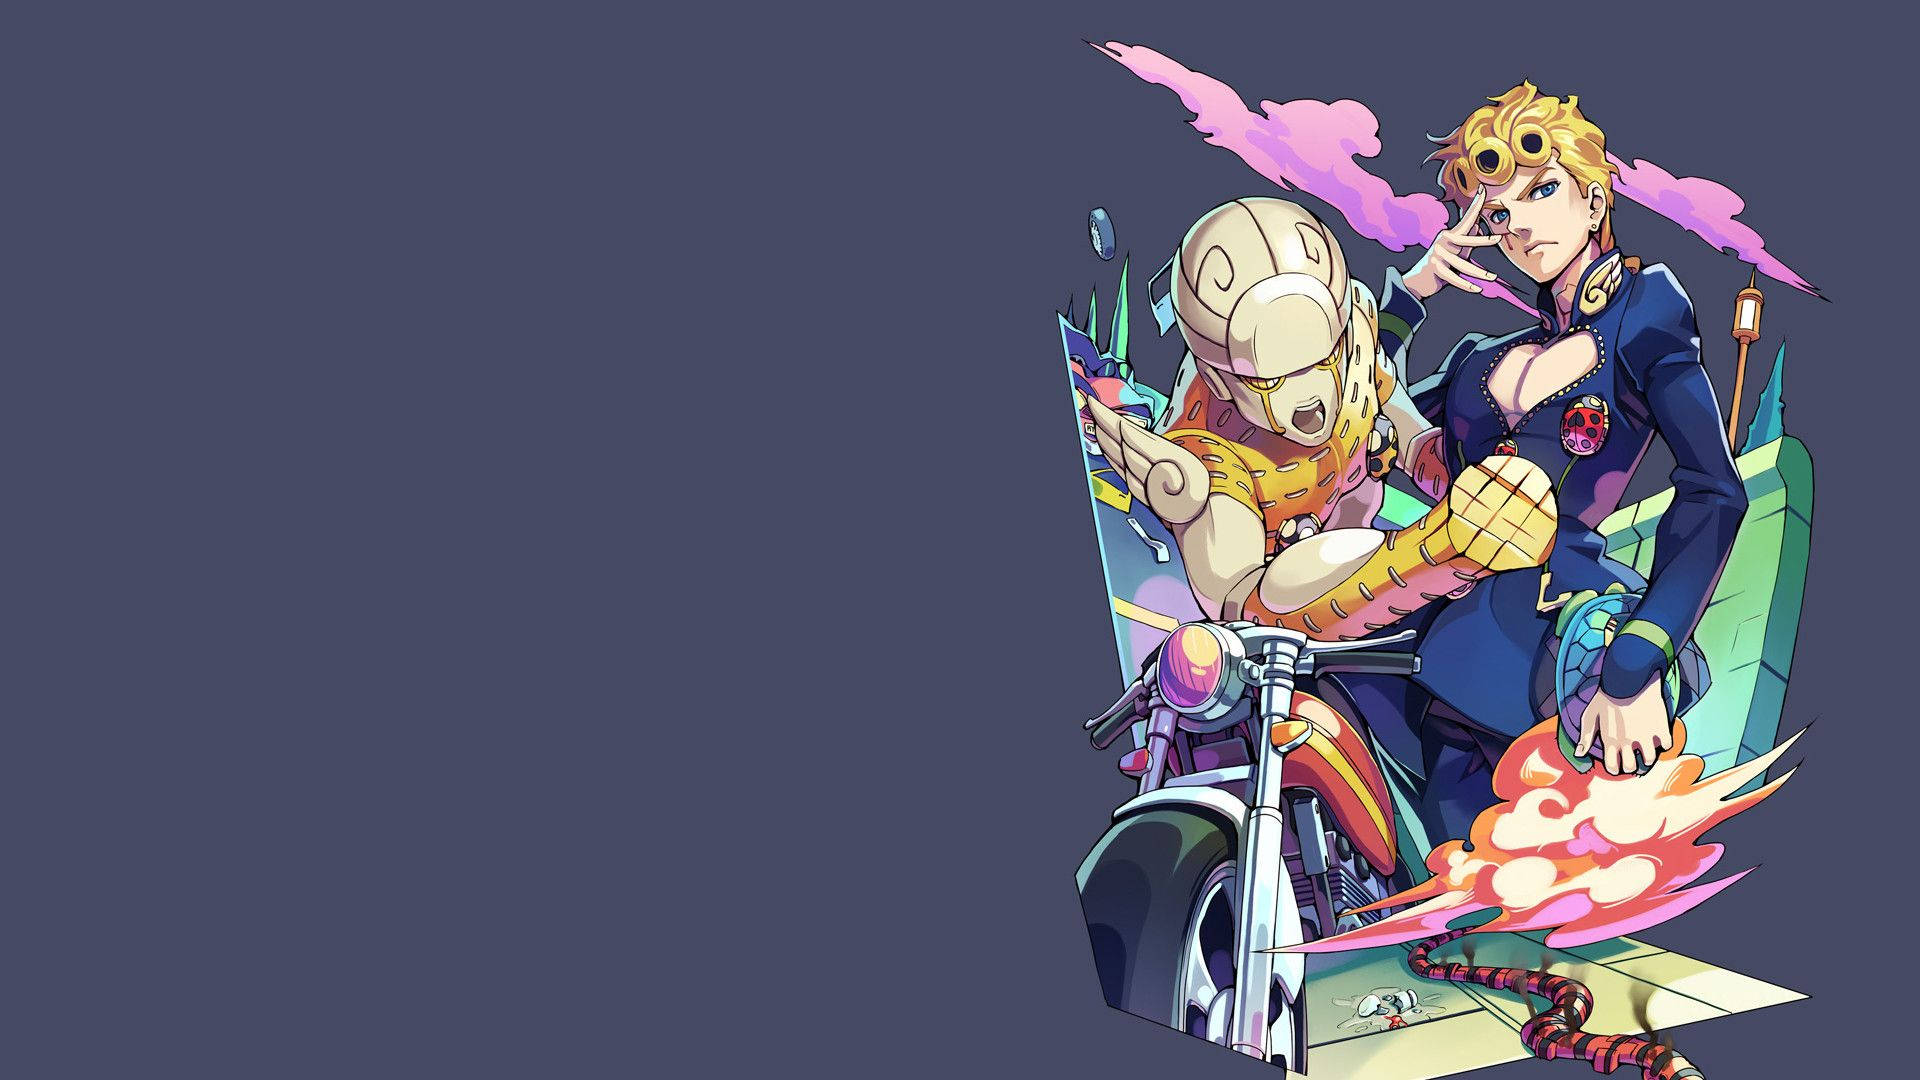 Giorno Giovanna, bringing justice and breaking the mold Wallpaper